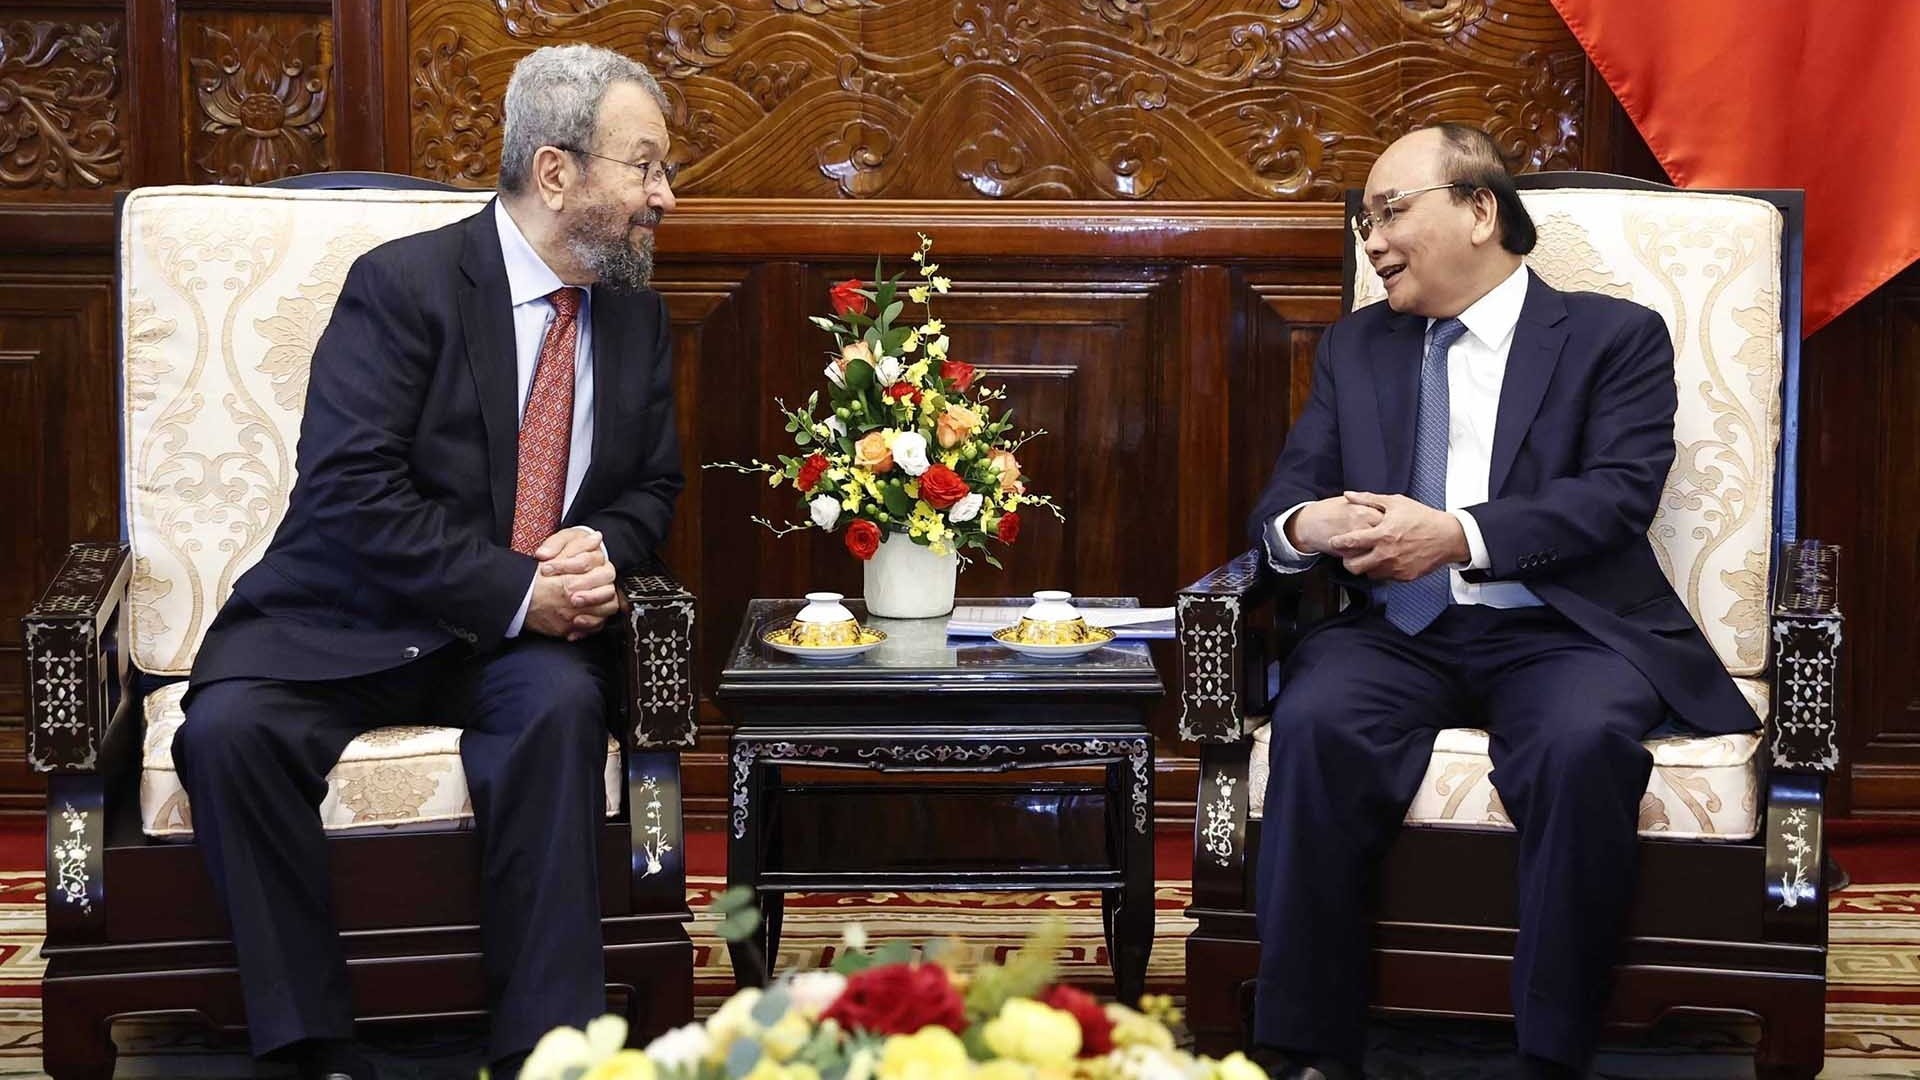 Israel has become an important partner of Vietnam: President